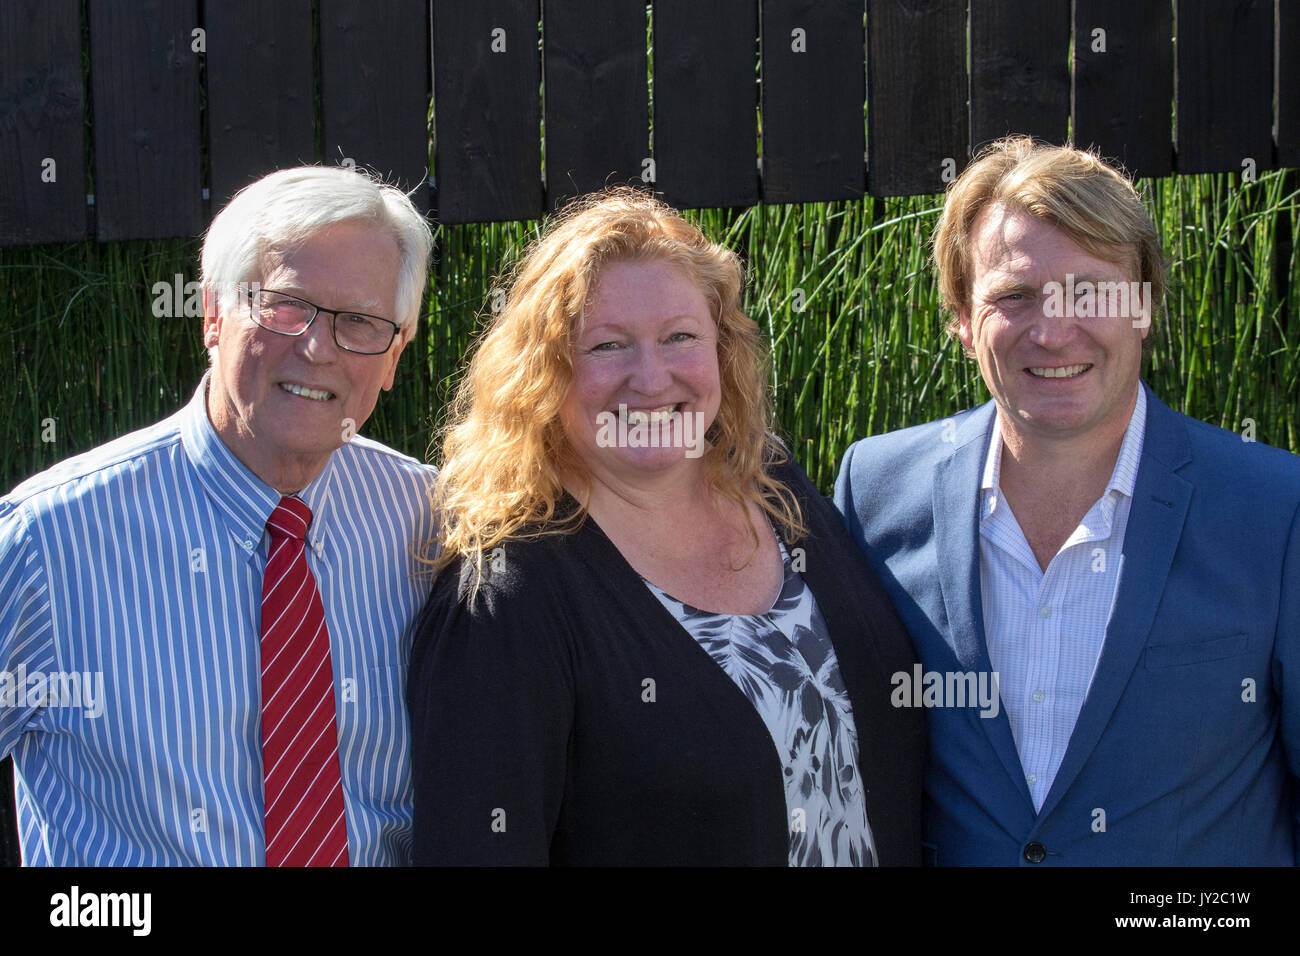 David Domoney, Charlie Dimmock, & John Craven at the Opening day at Southport Flower Show as TV presenters, garden designers, and floral experts, professional gardeners await the arrival of up to 80,000 visitors who are expected to attend to this famous annual event. Stock Photo